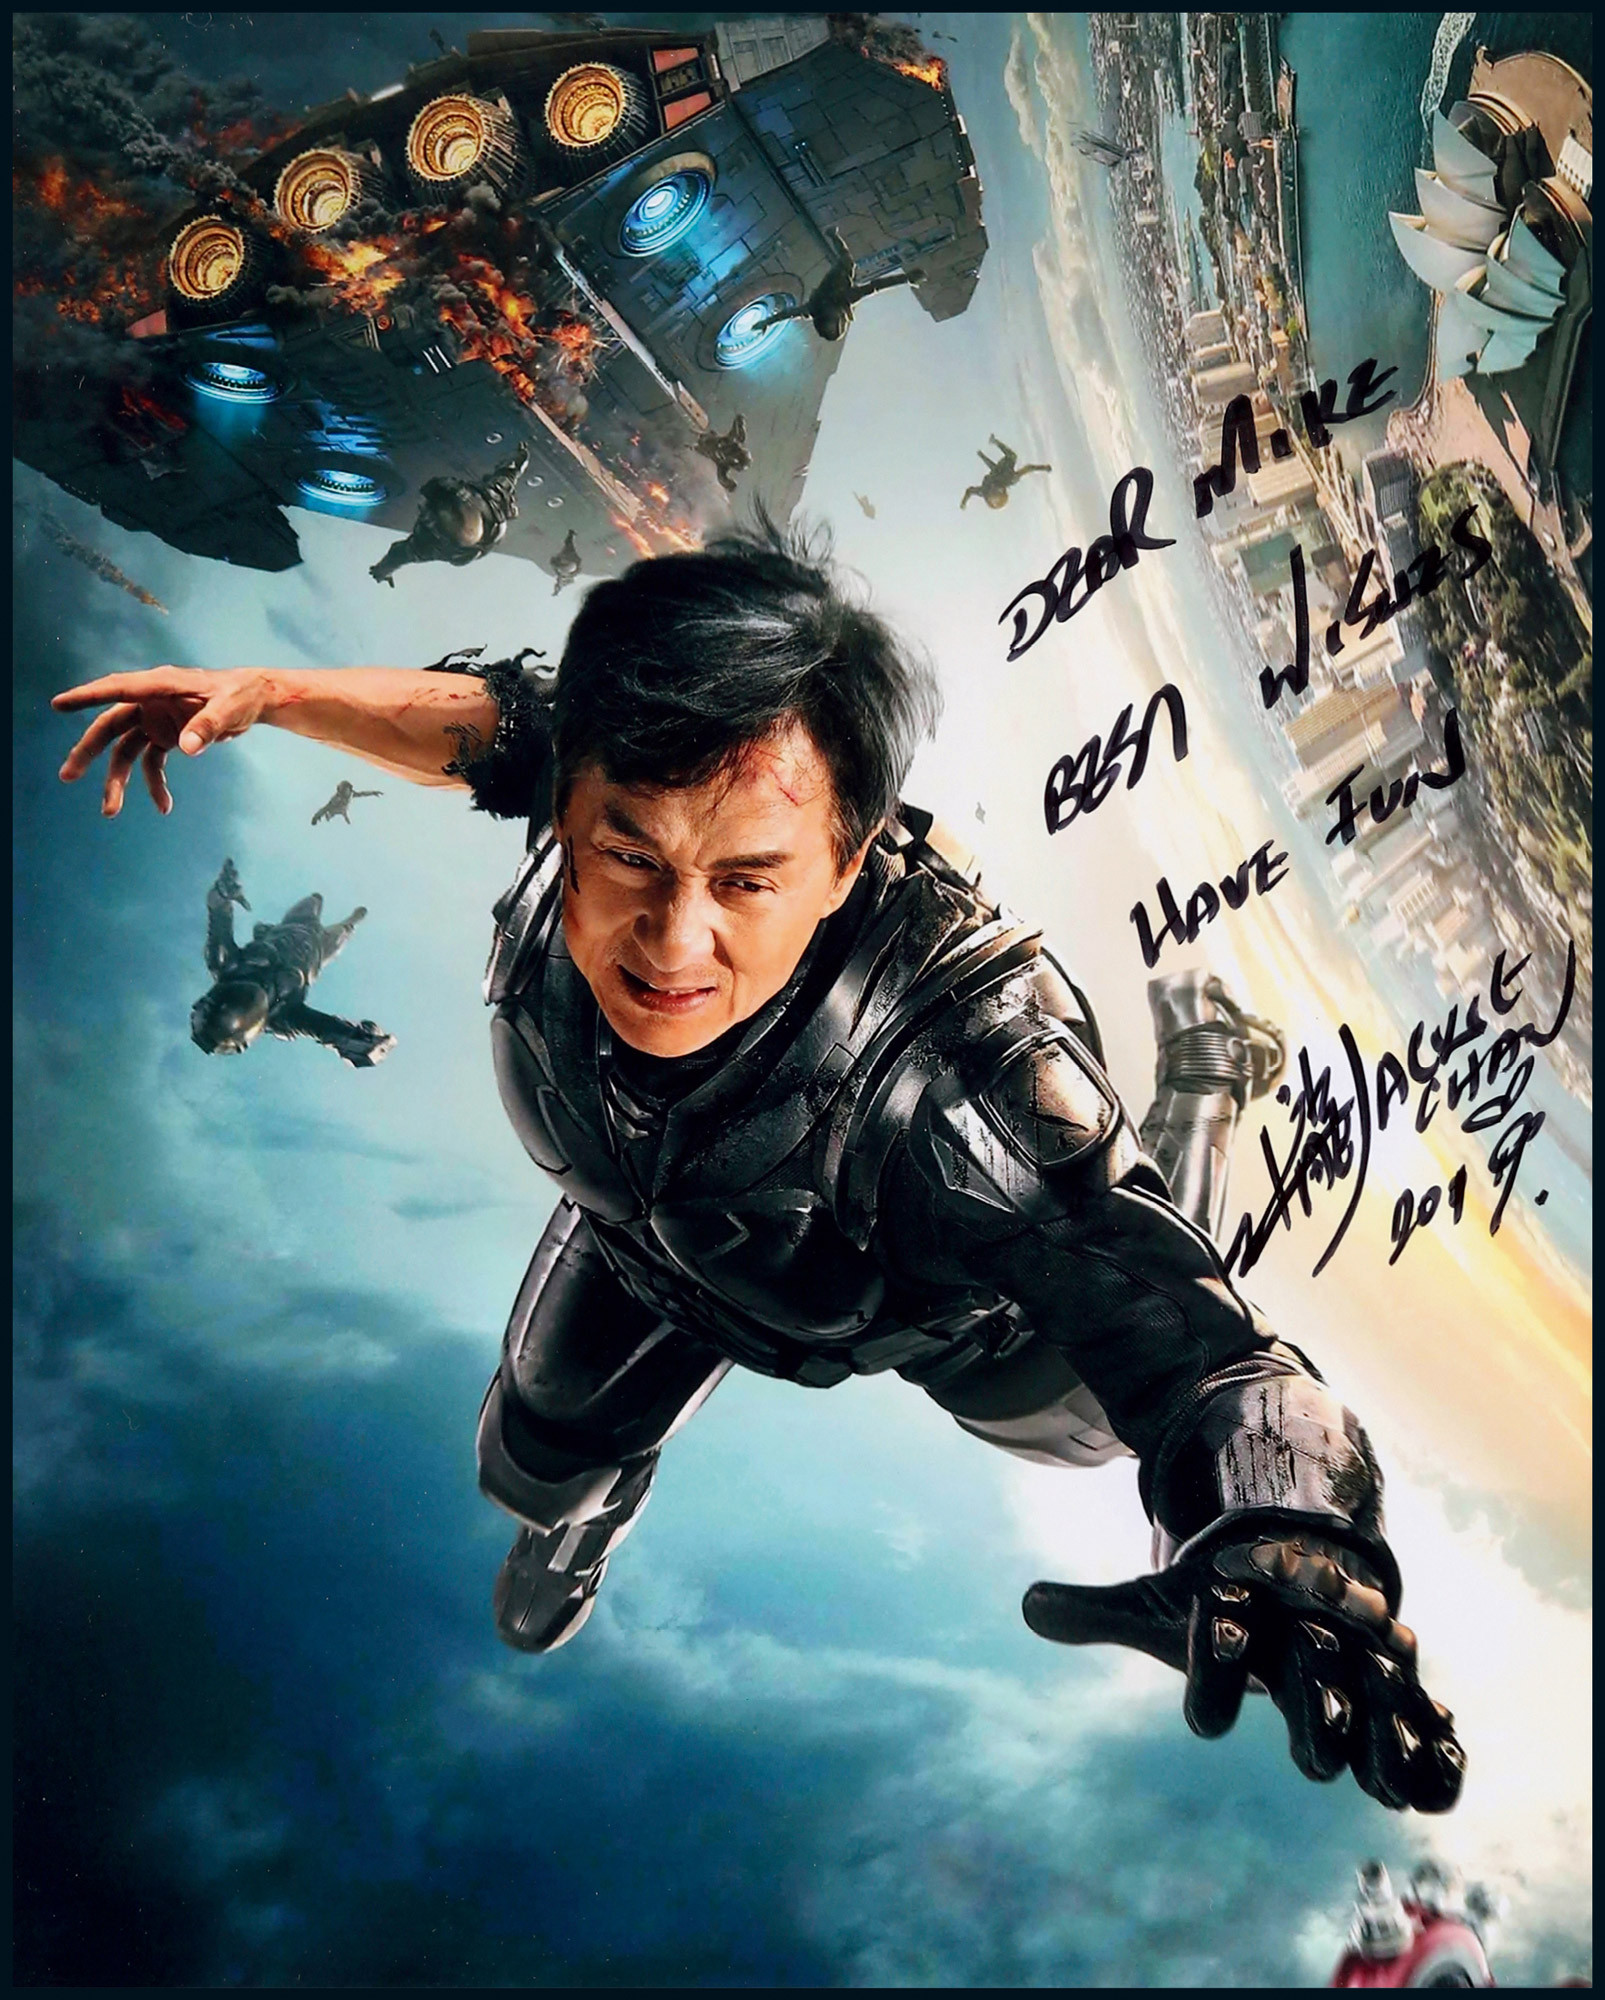 The autographed photo of Jackie Chan with certificate